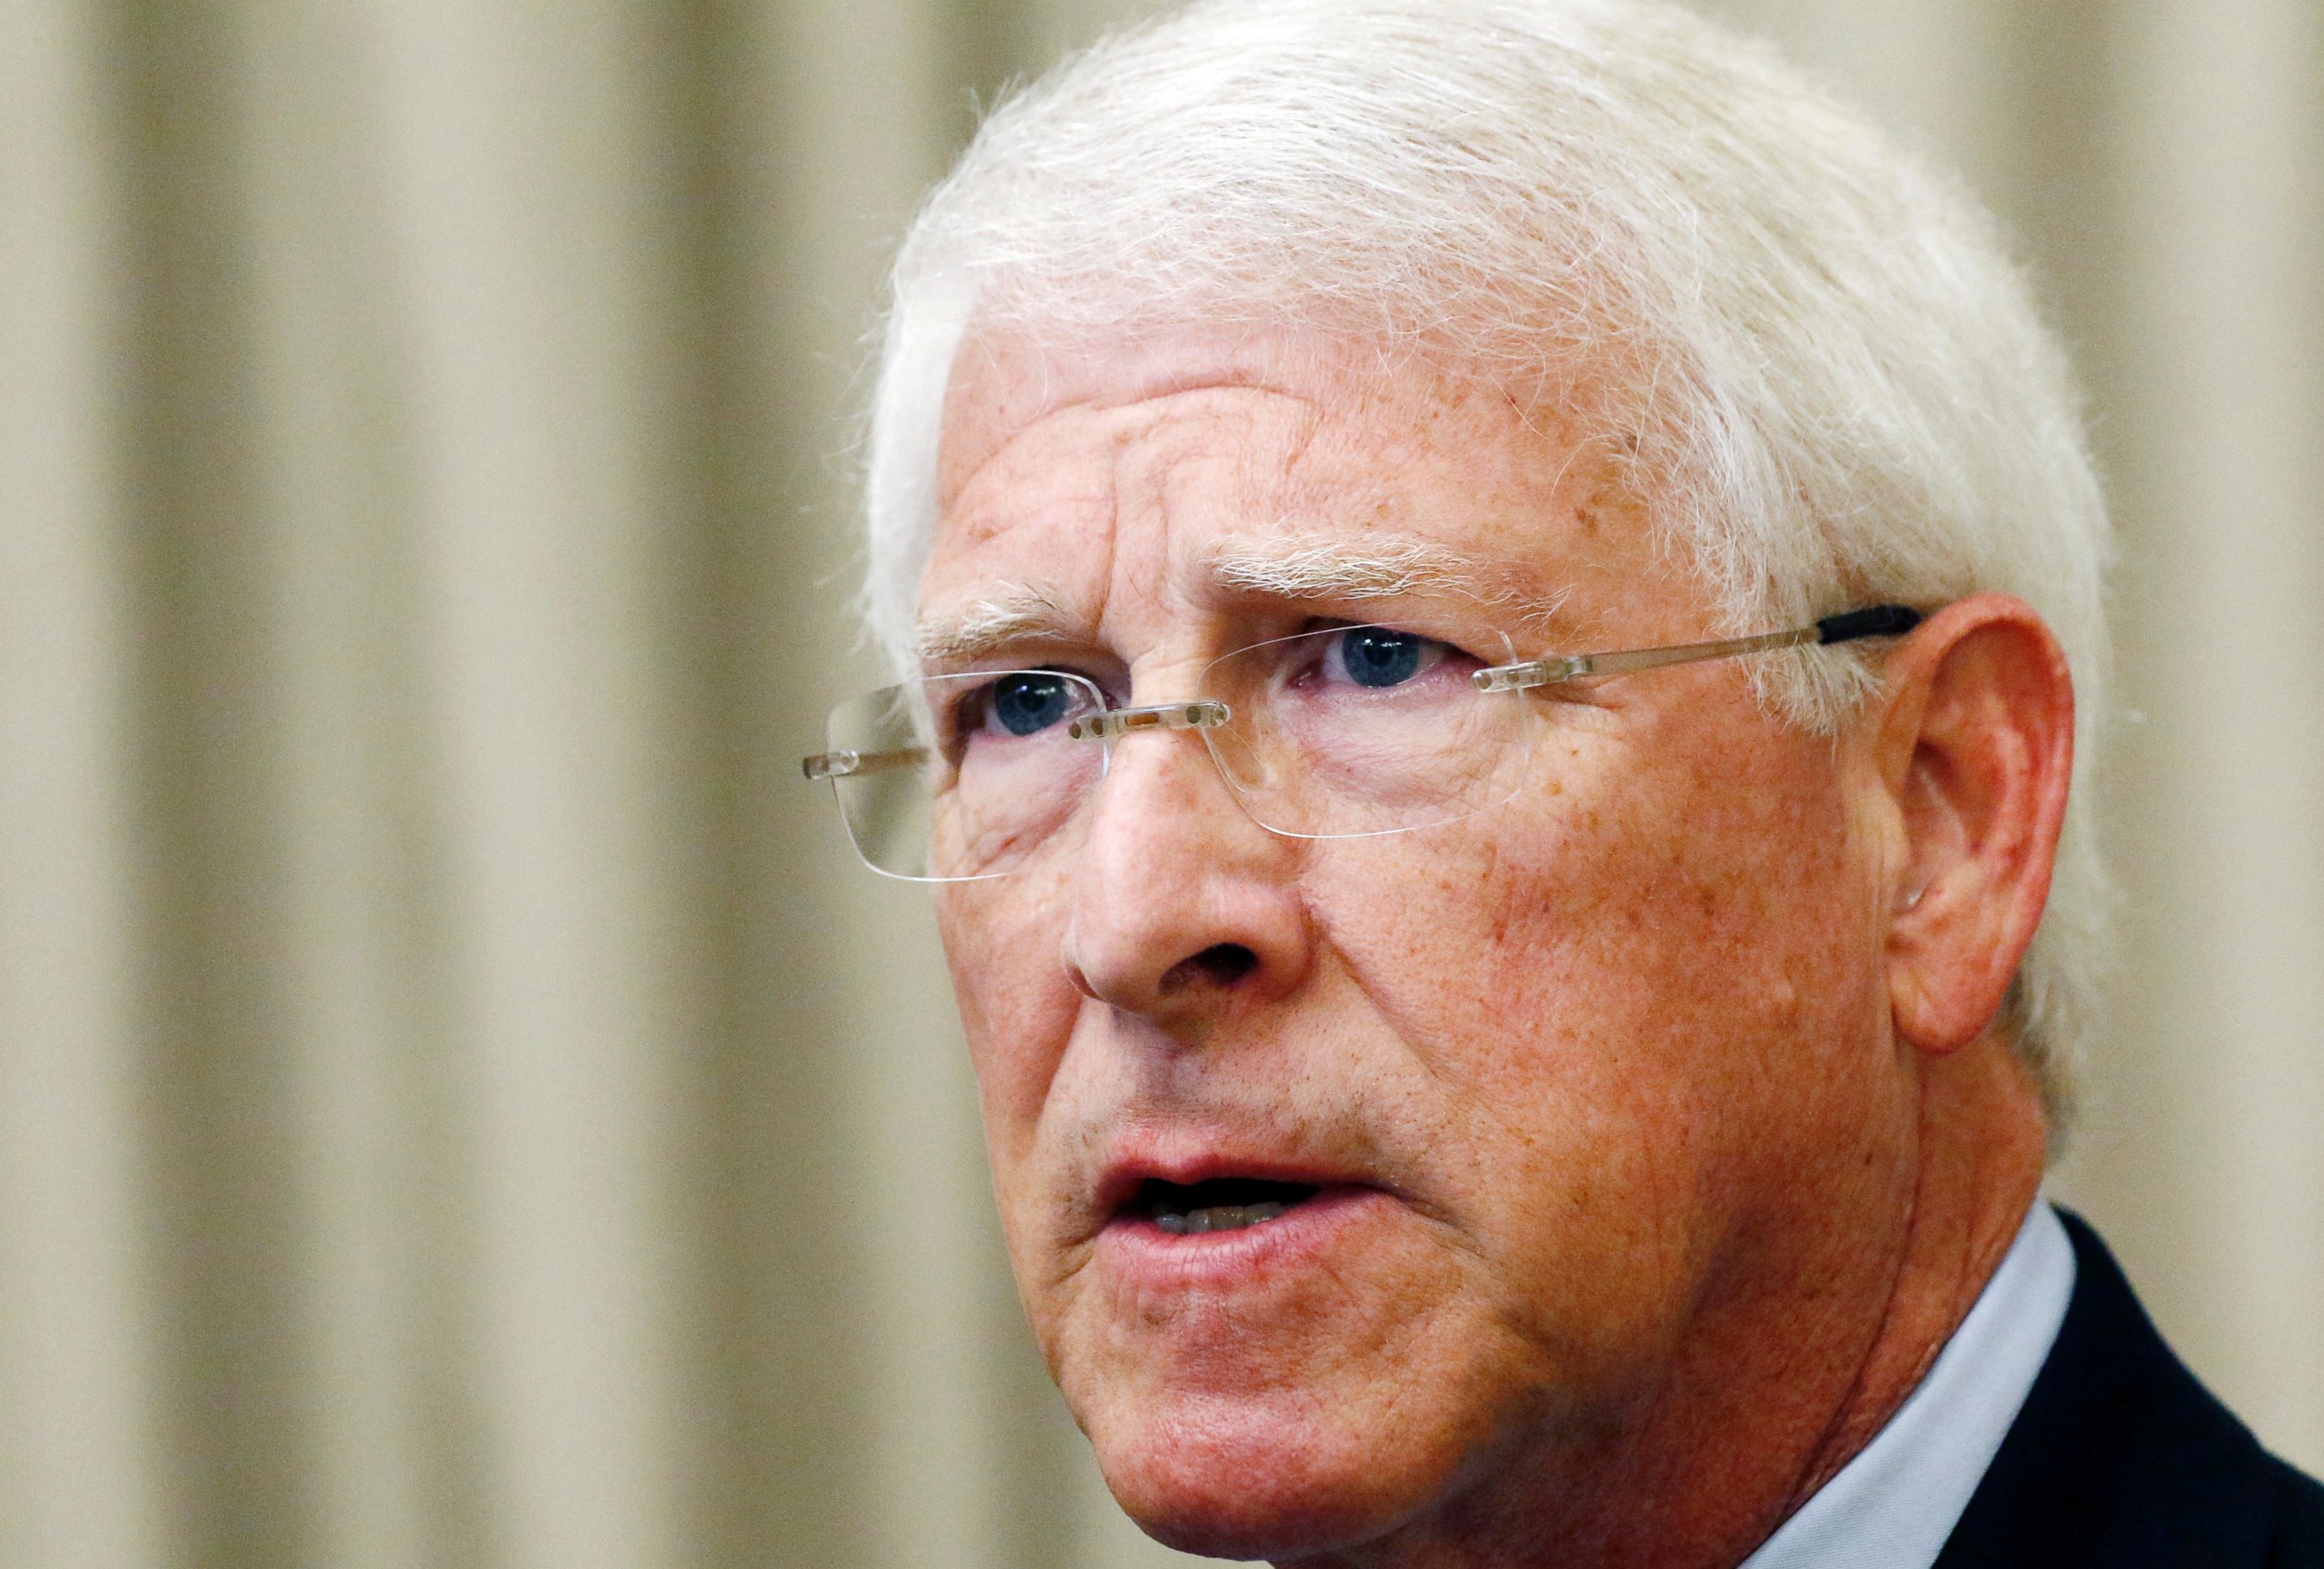 In this Monday, Aug. 14, 2017, file photo, U.S. Sen. Roger Wicker, R-Miss., speaks during an address in Jackson, Miss. Mississippi lawmaker Chris McDaniel is hinting strongly that he will challenge Wicker in the 2018 U.S. Senate race.